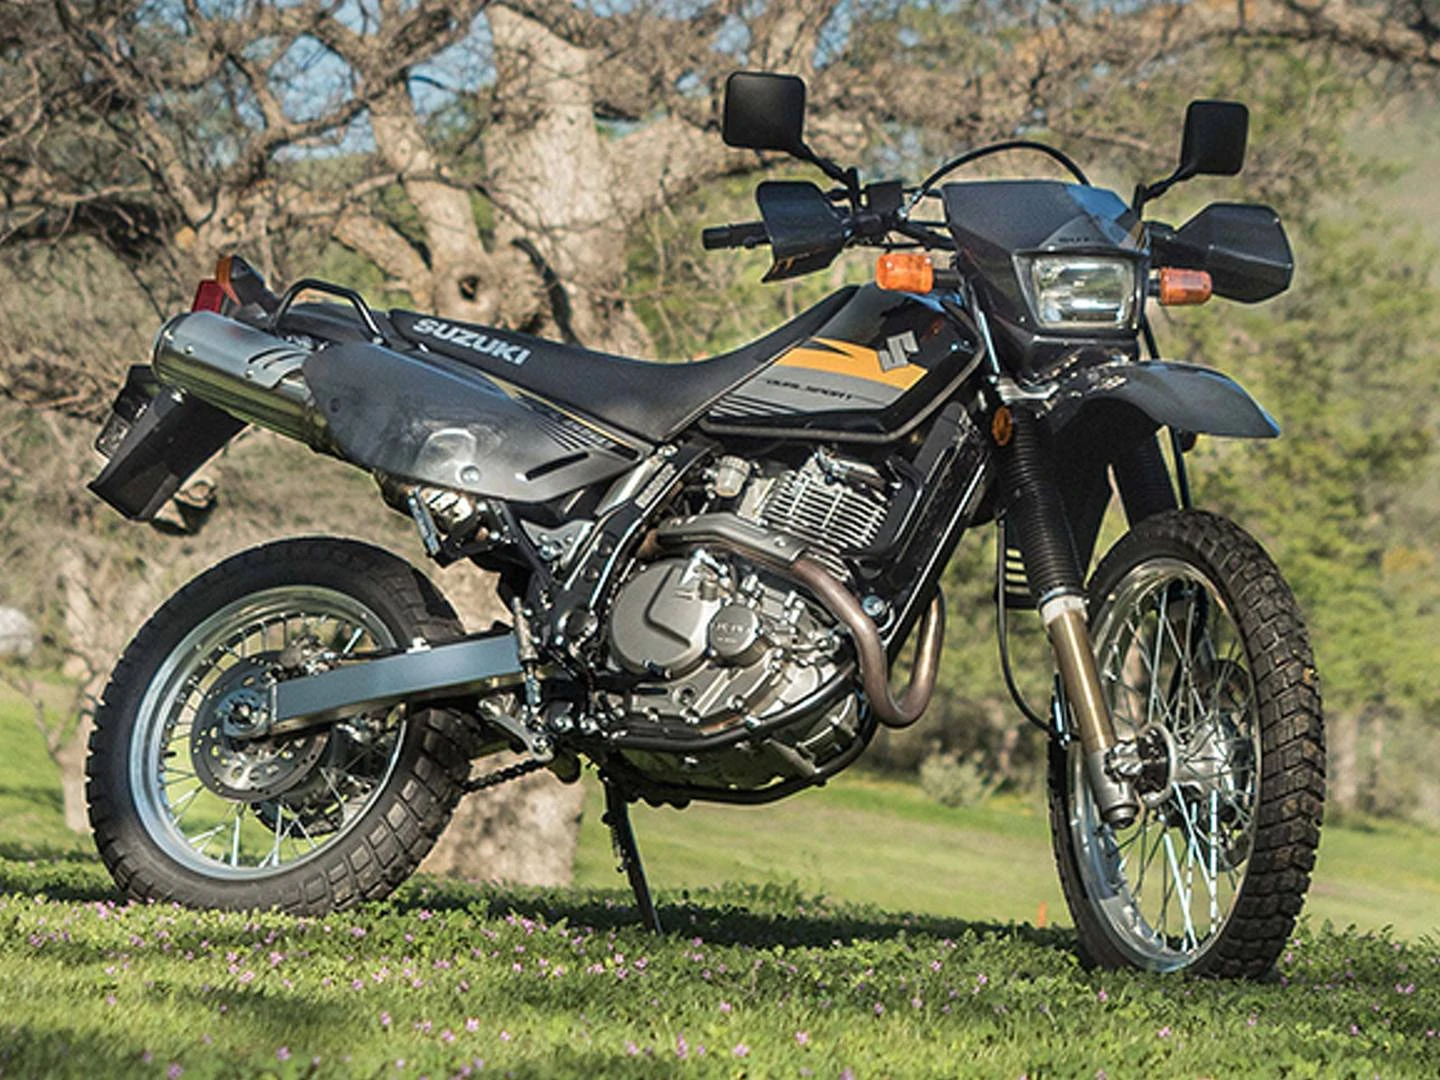 The Suzuki DR650 Still Holds Its Weight, 30 Years Later